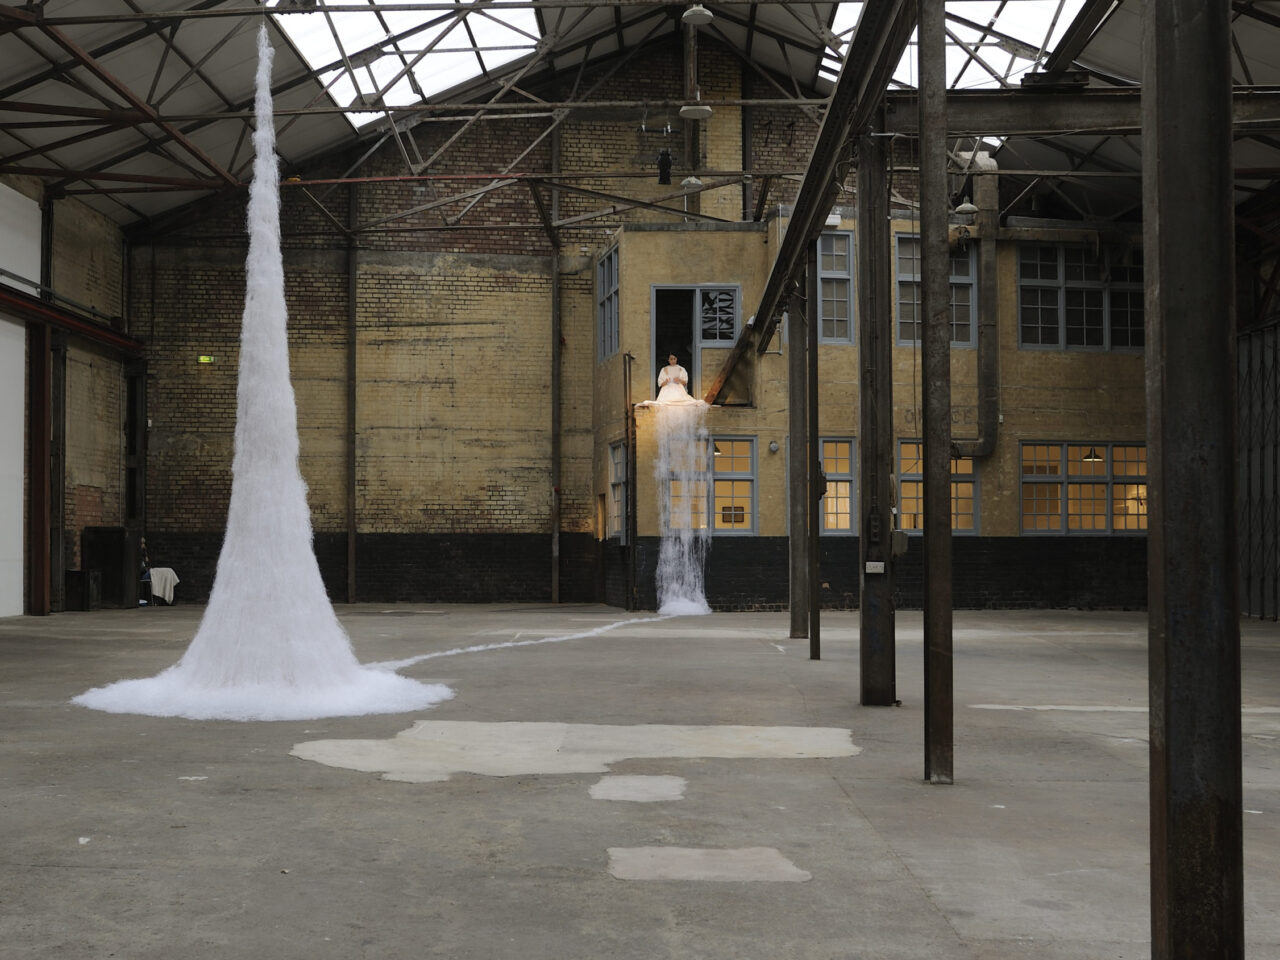 A large warehouse with metal pillars and a yellow brick wall at the back. In the space is a person on a balcony, they are wearing all white cutting paper, the paper is trailing down from the balcony to a sculpture in the middle of the warehouse. The sculpture is a fountain shape made of white paper and wire.